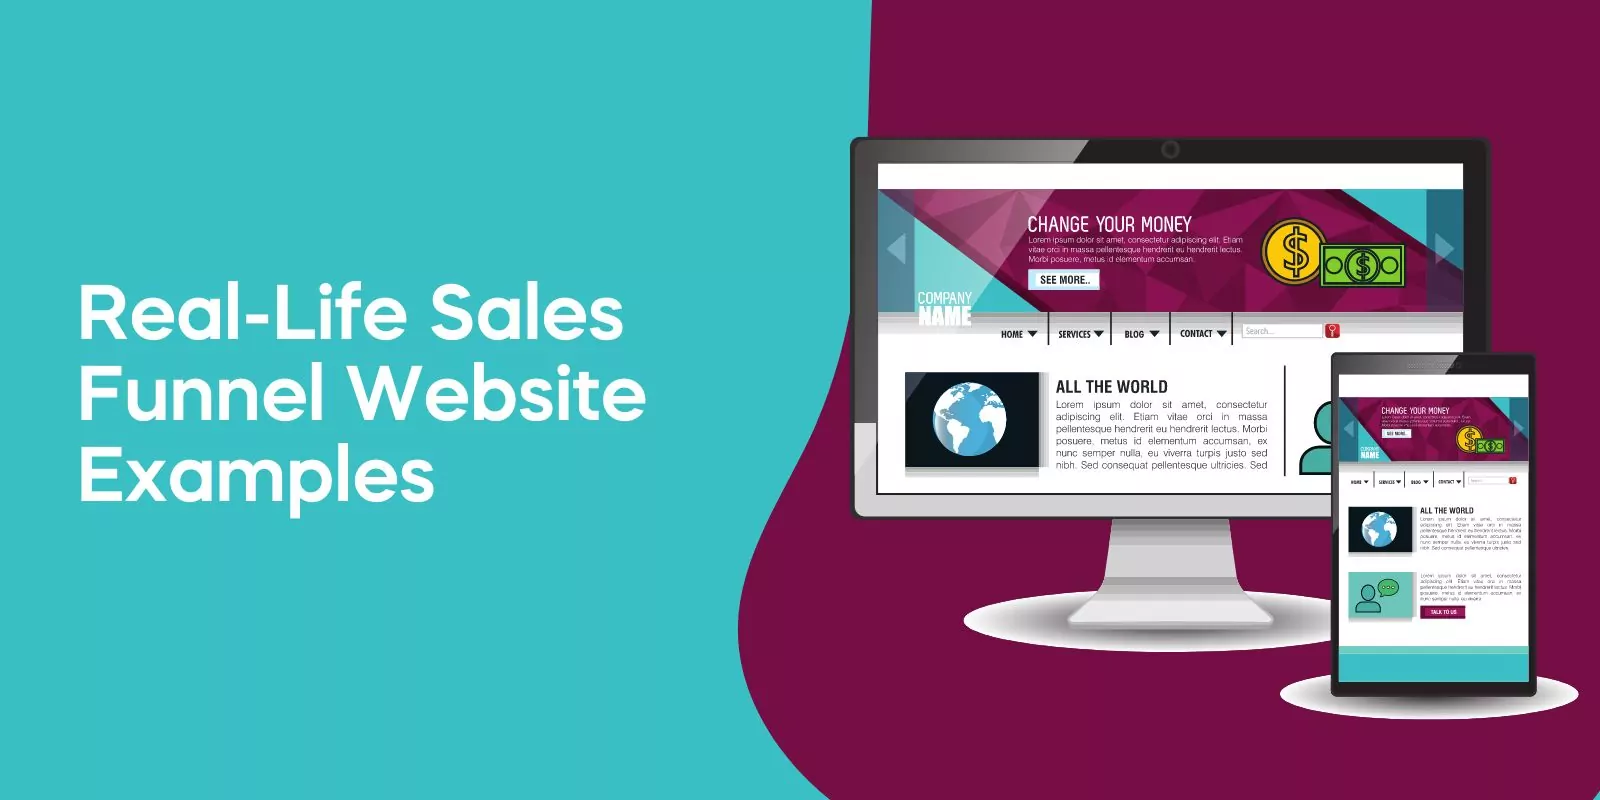 Real-Life Sales Funnel Website Examples